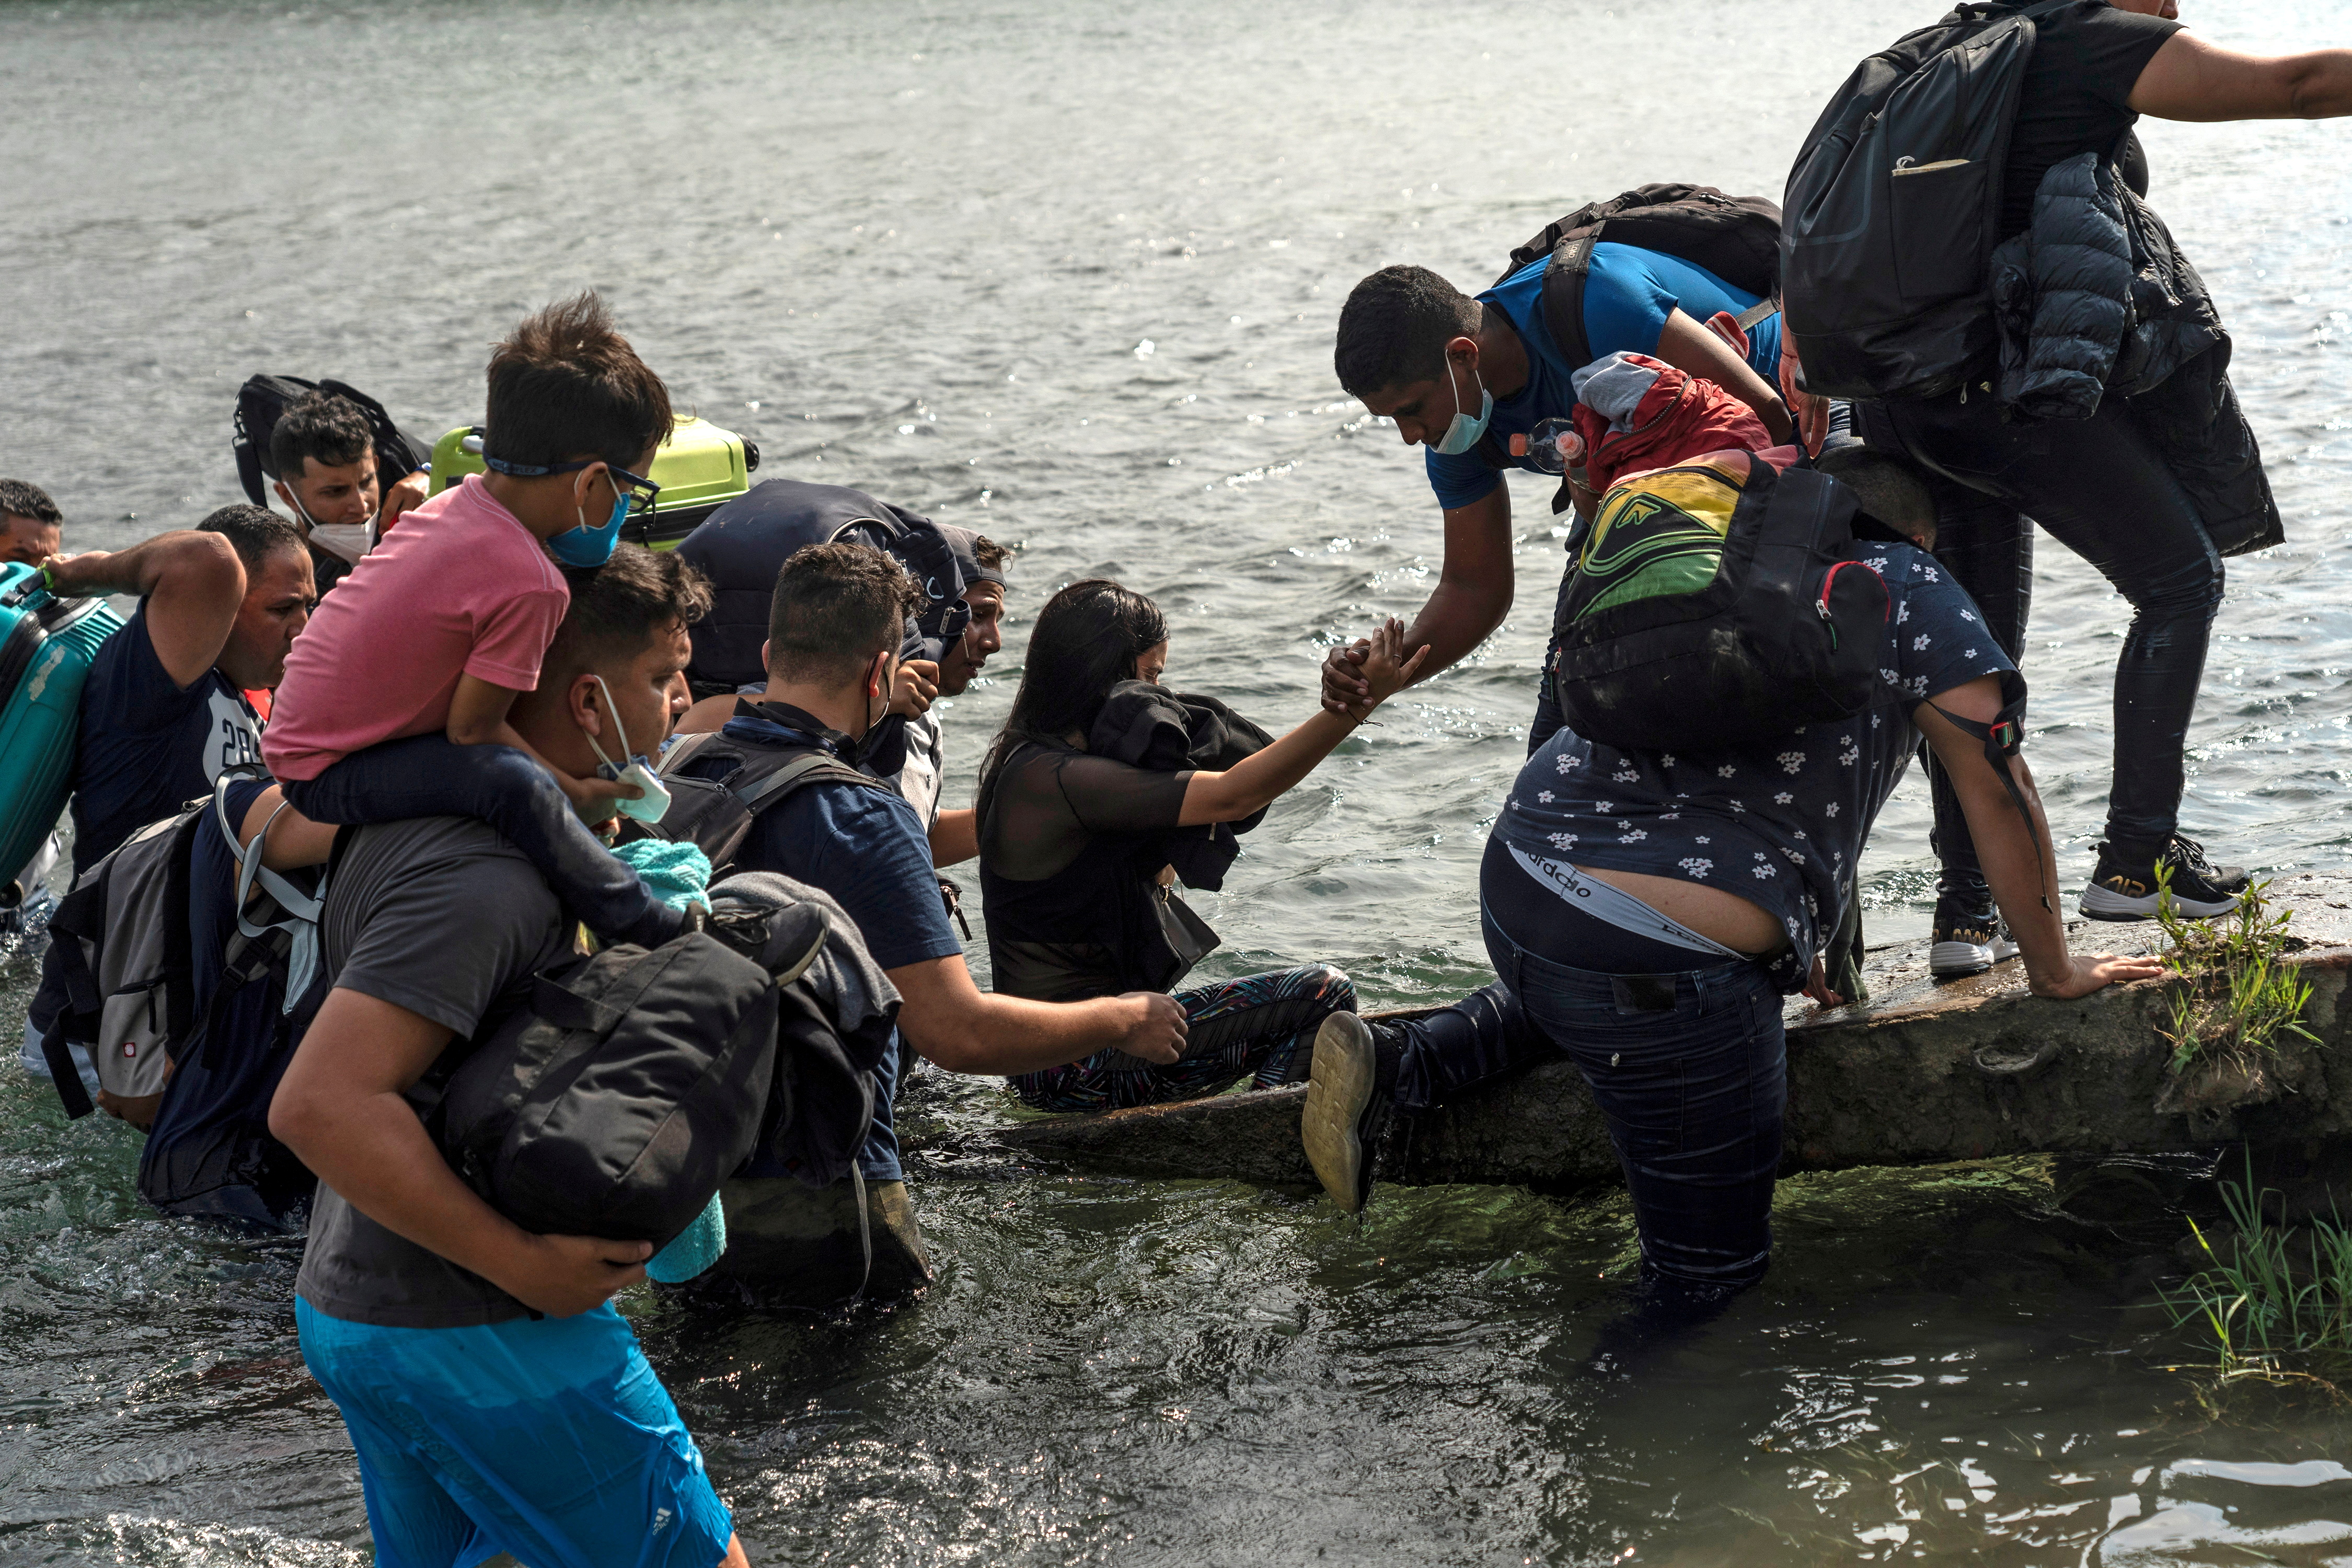 Asylum-seeking migrants' families from Venezuela reach the shore after crossing the Rio Grande river into the United States from Mexico in Del Rio, Texas, U.S., May 26, 2021. REUTERS/Go Nakamura/File Photo